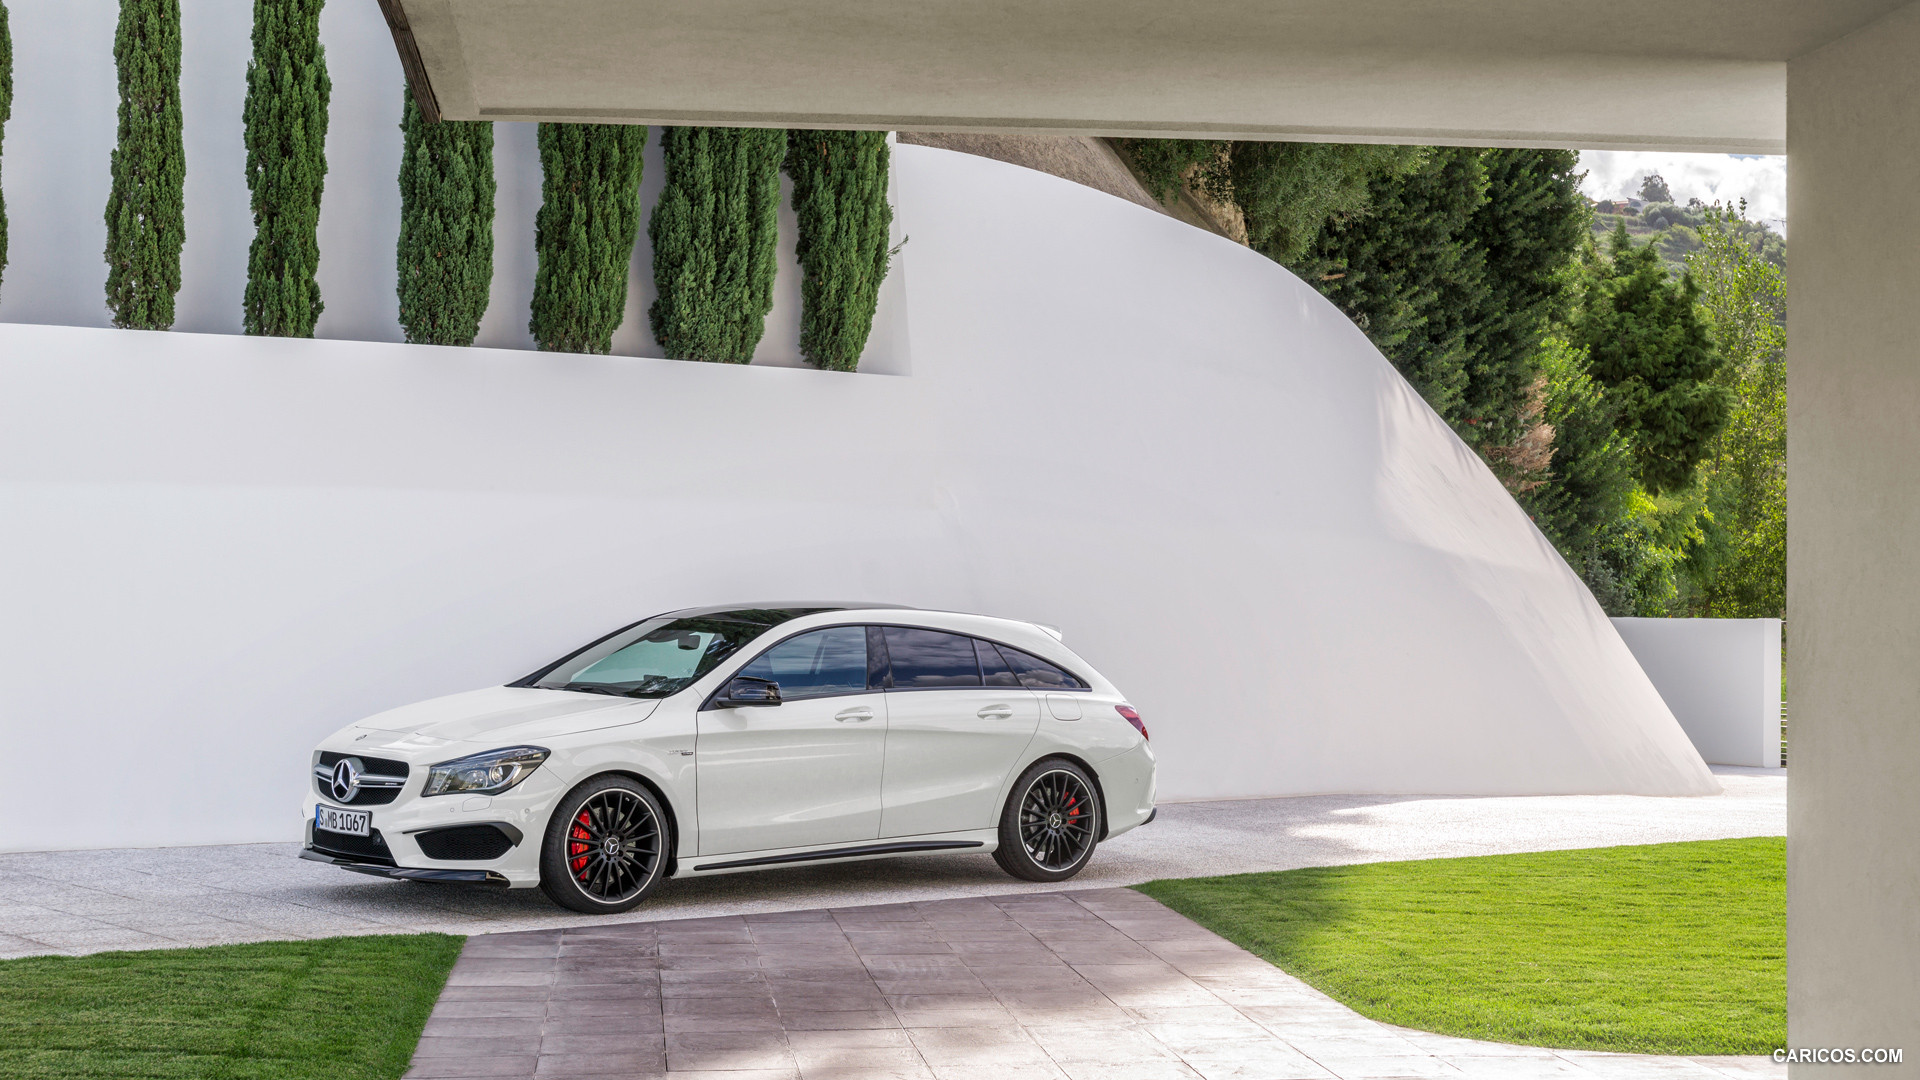 2015 Mercedes-Benz CLA 45 AMG Shooting Brake (Calcite White) - Side, #32 of 70